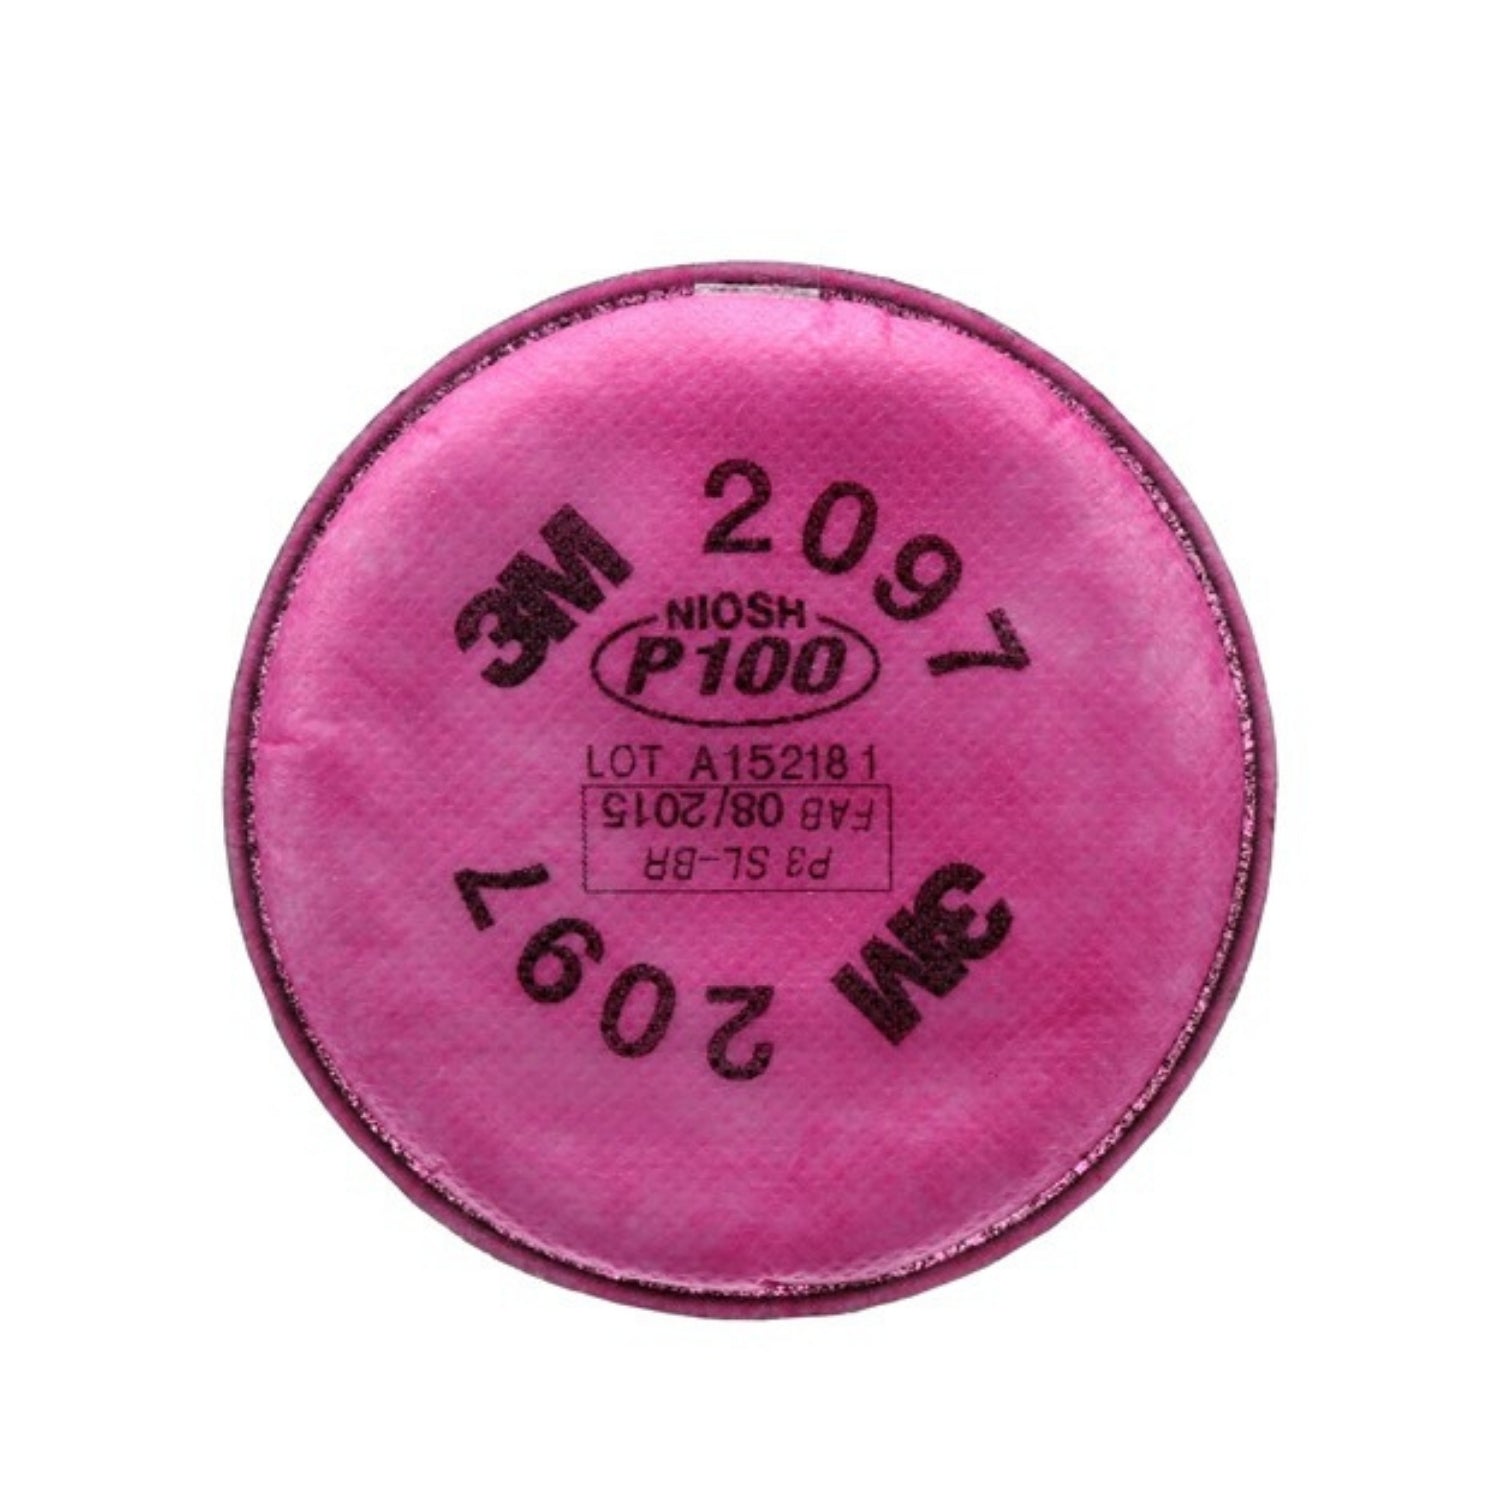 3M™ Particulate Filter 2097/07184(AAD), P100, with Nuisance Level Organic Vapor Relief 100 - Magenta